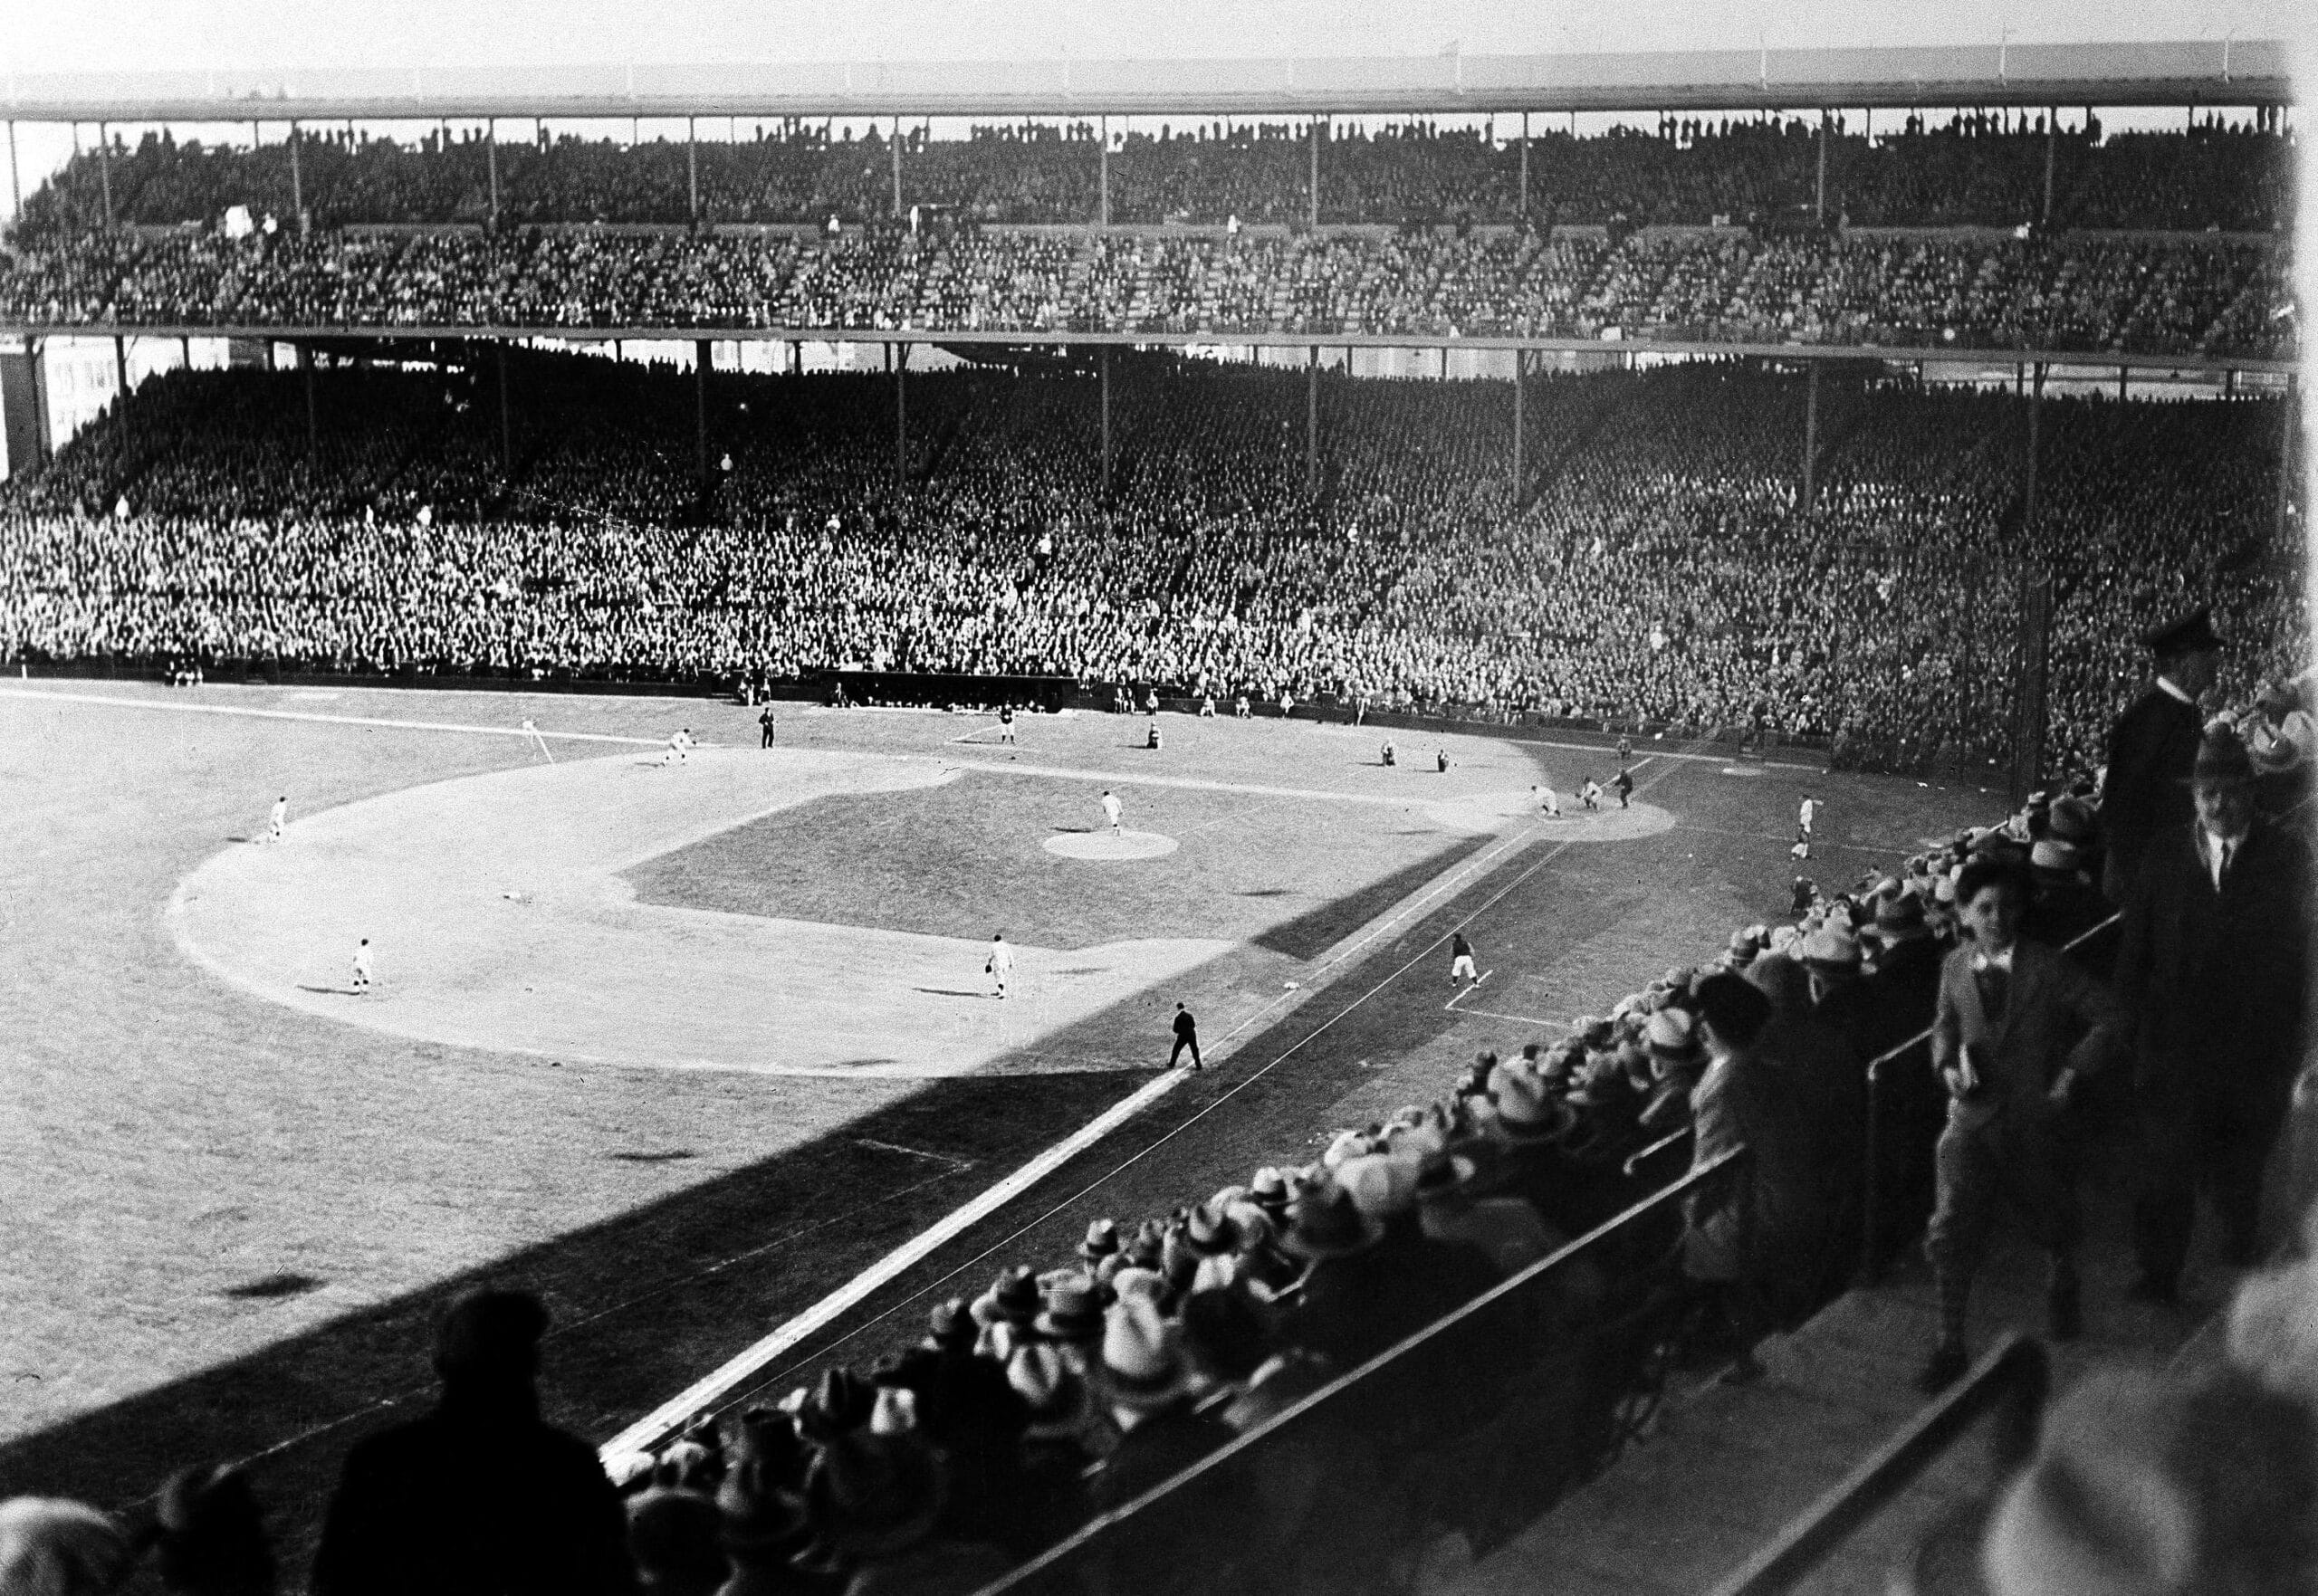 7 Interesting Facts About The 1906 World Series - The History Junkie